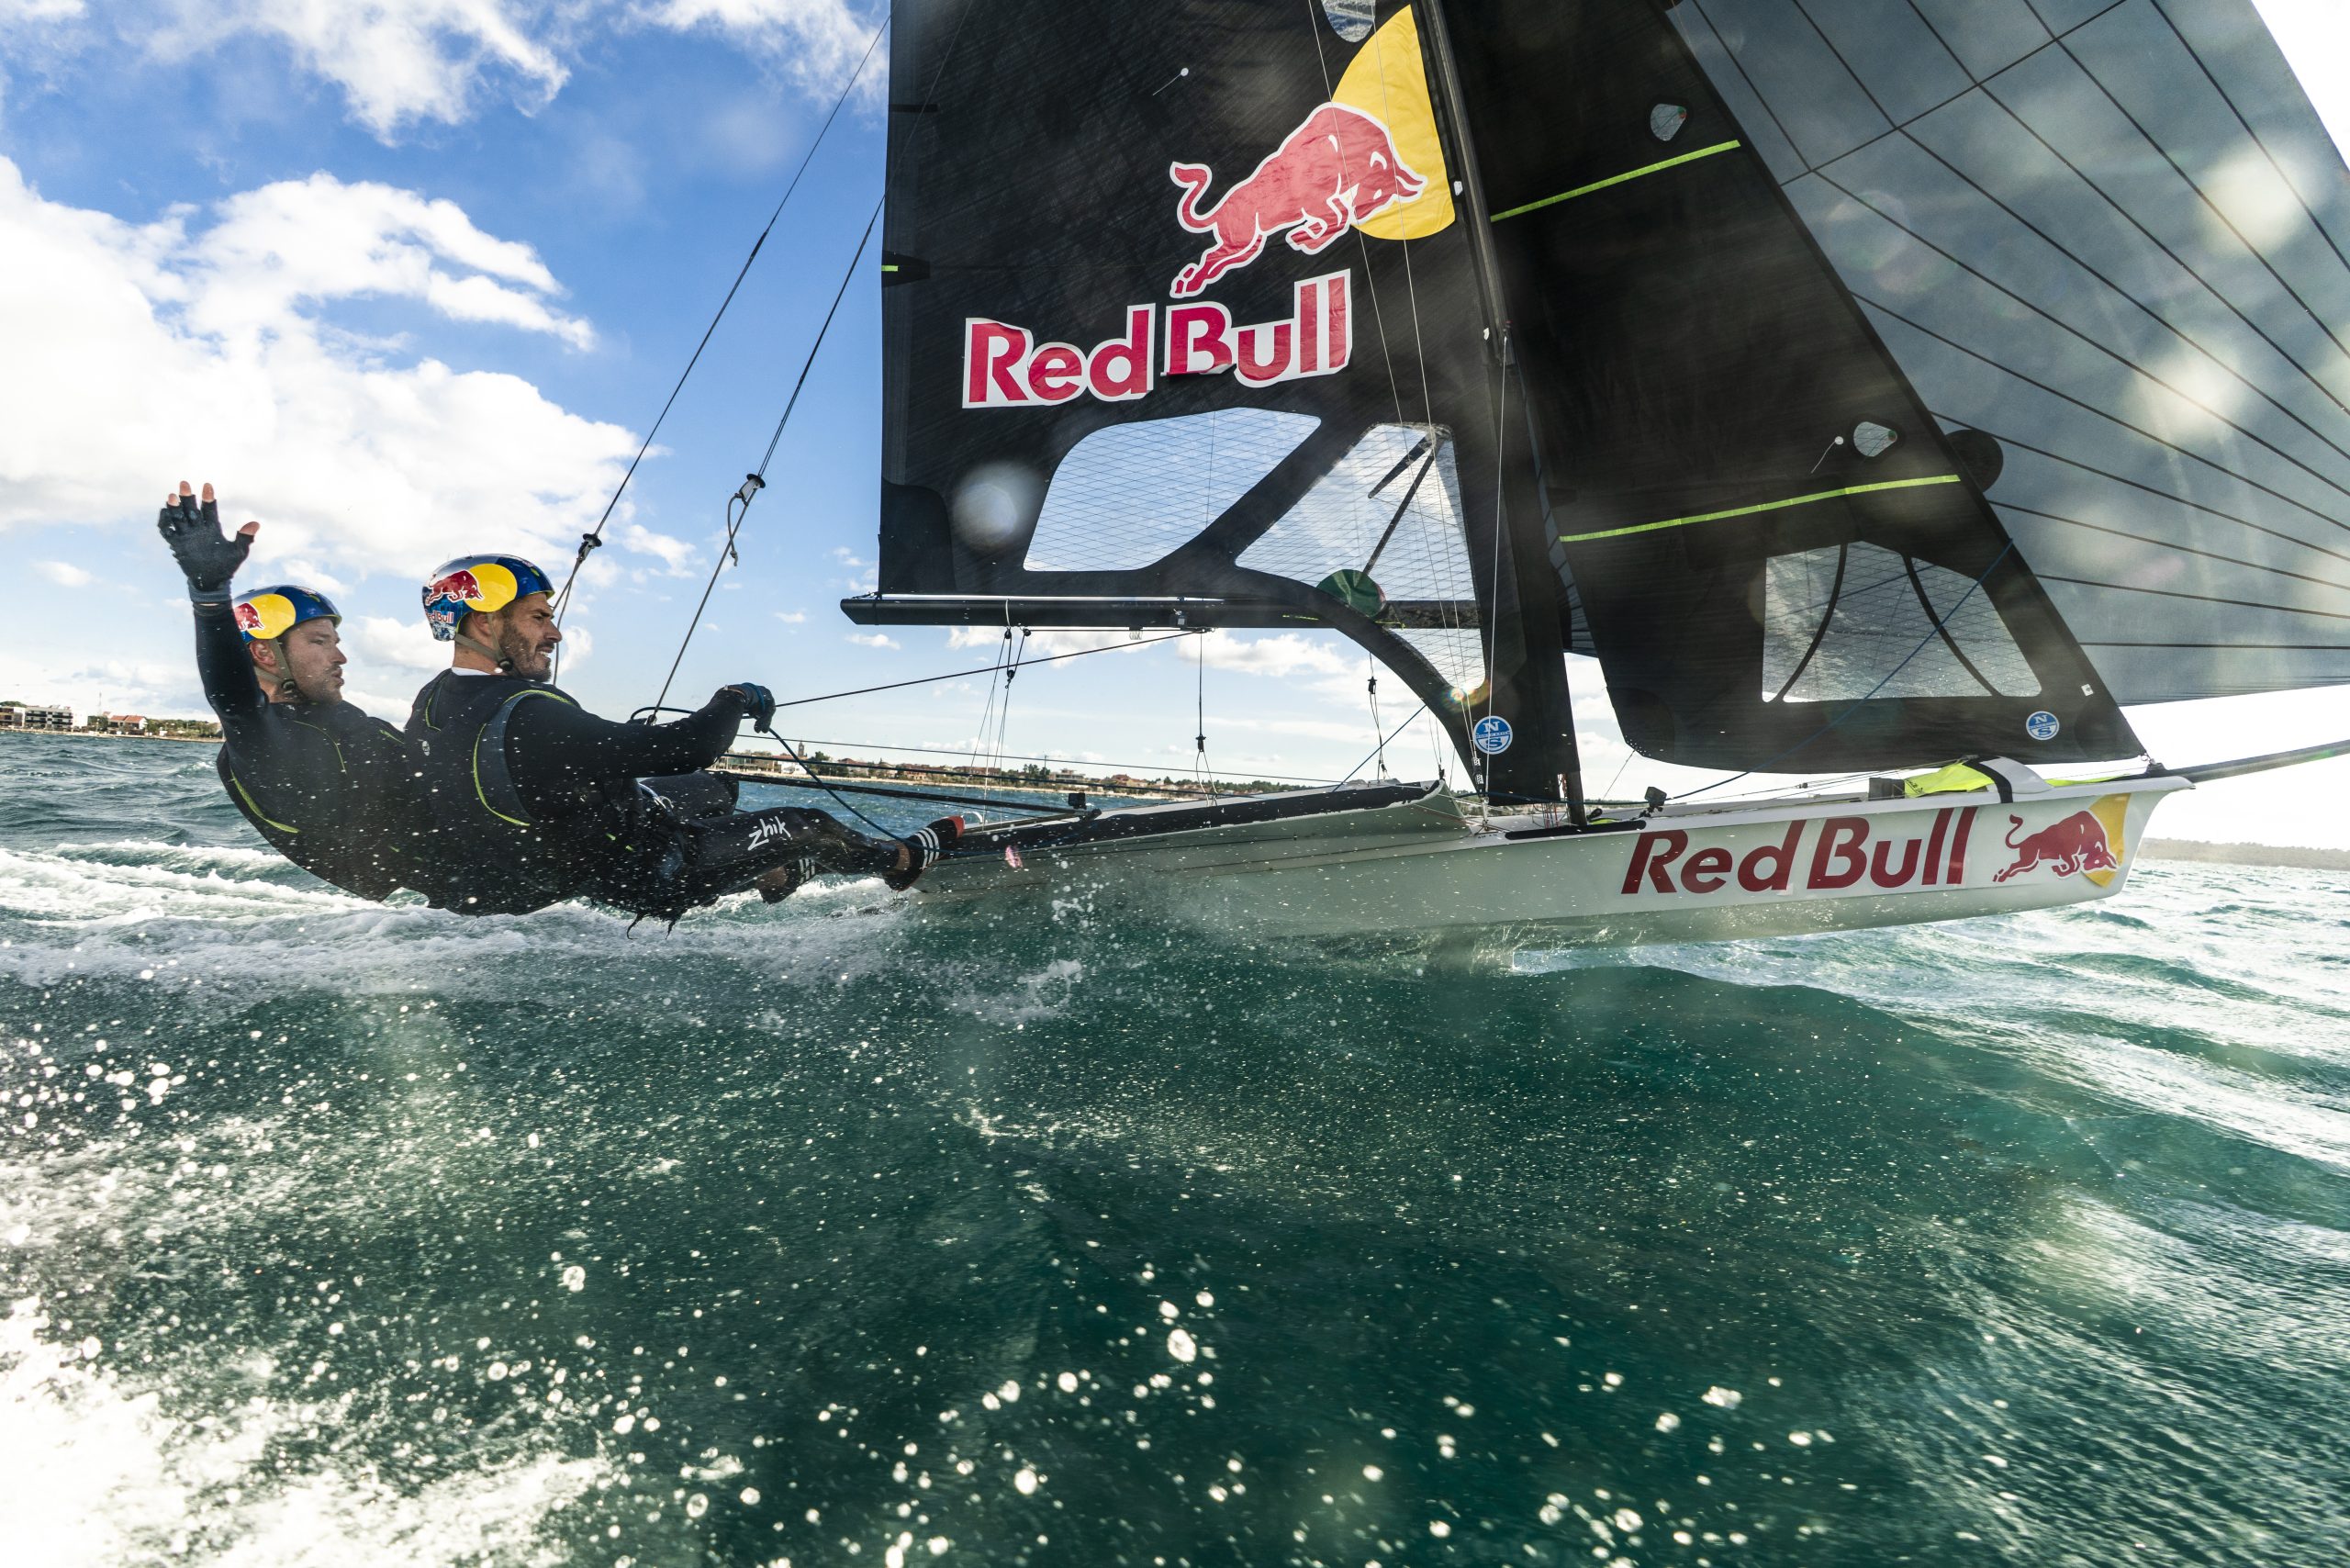 Sailing on hurricane kind of wind: Fantela brothers broke their own record in sailing 49er!